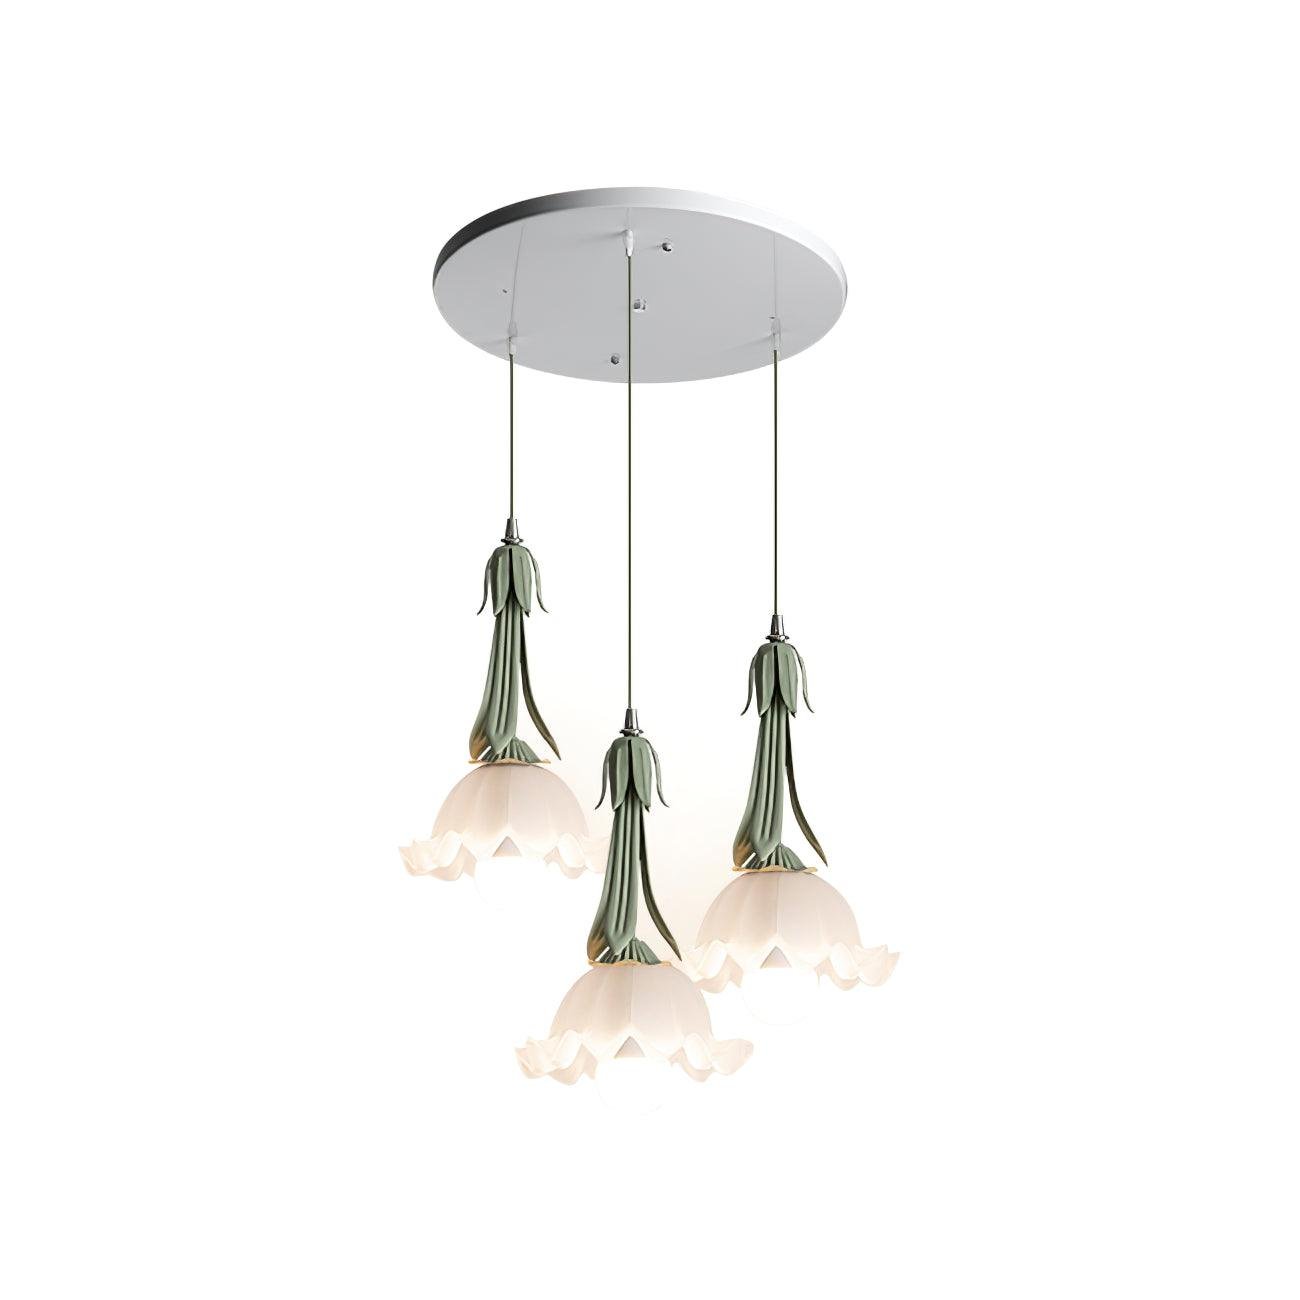 Lily of the Valley Pendant Light in Green and White, Diameter 13.8 inches x Height 59 inches (35cm x 150cm)